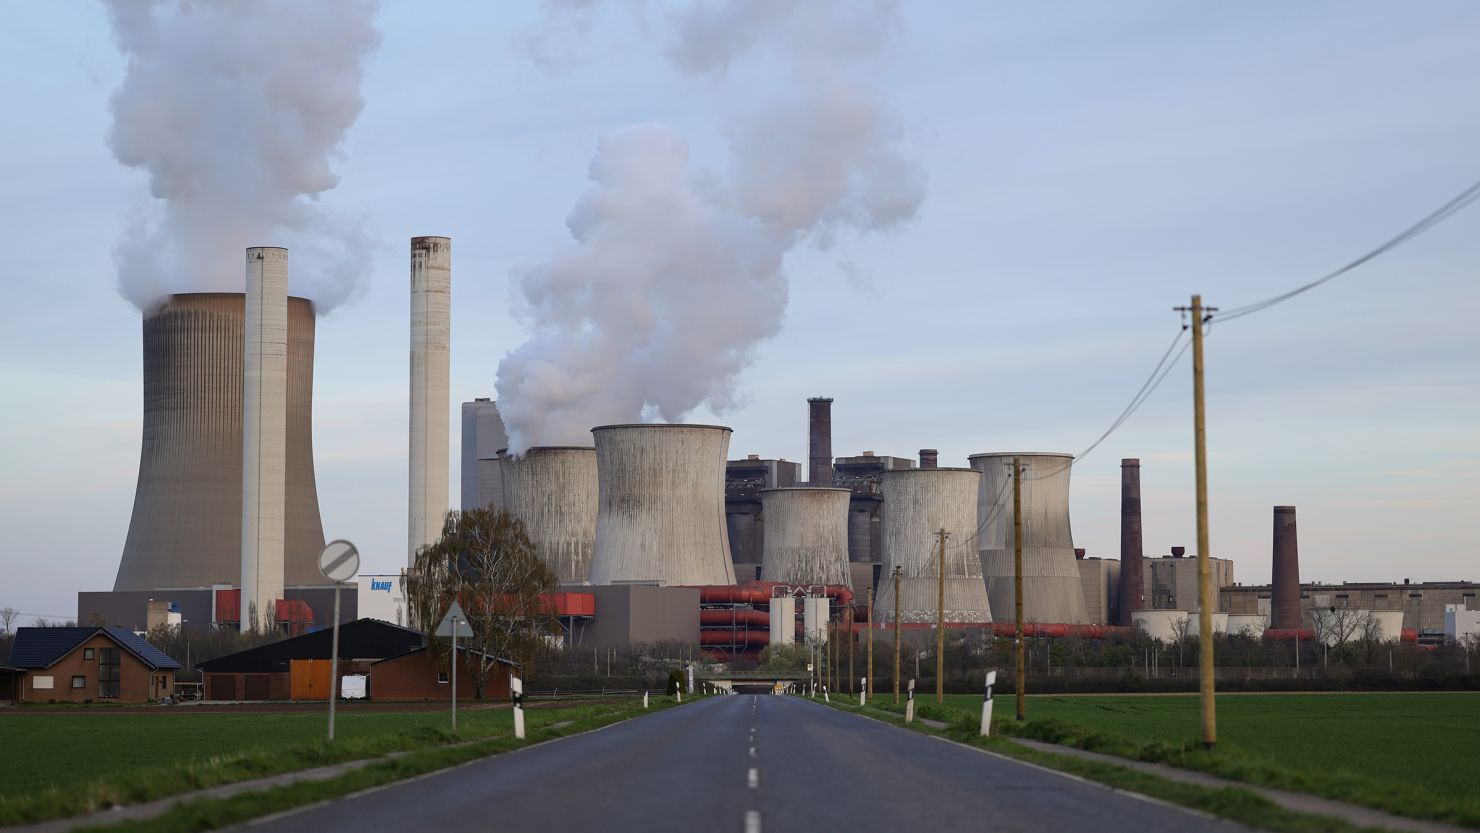 Cooling towers and smokestacks at the Niederaussem coal-fired power plant on March 25, in Bergheim, Germany.